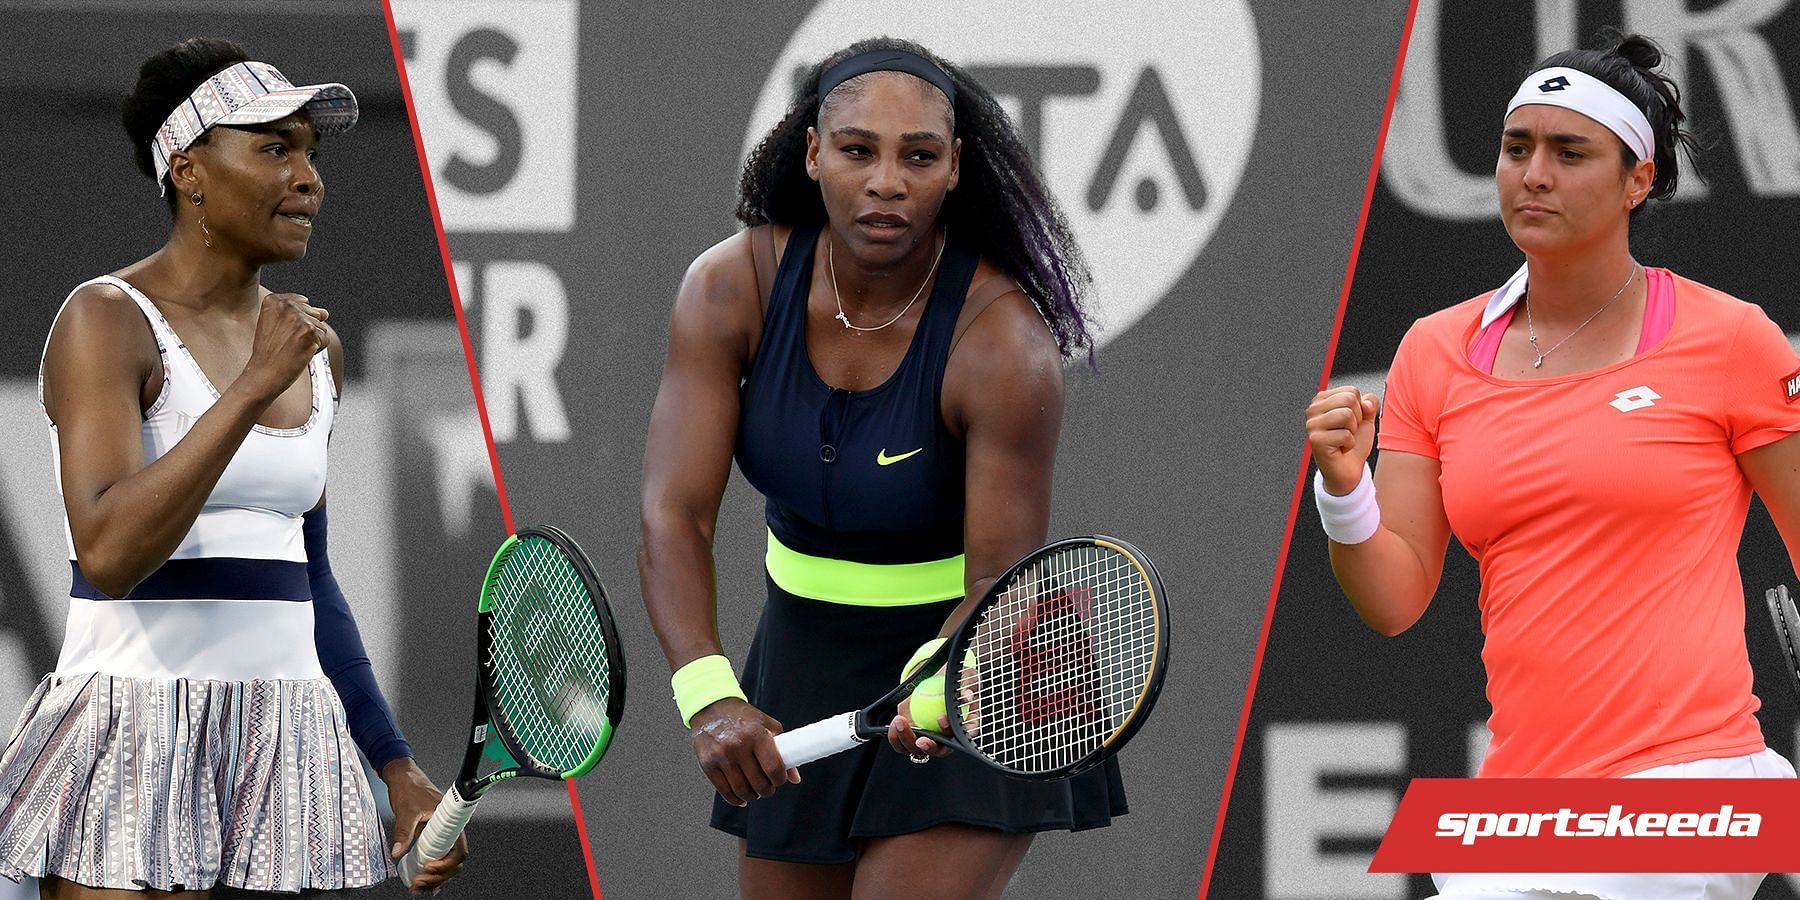 From L to R: Venus Williams, Serena Williams, and Ons Jabeur 